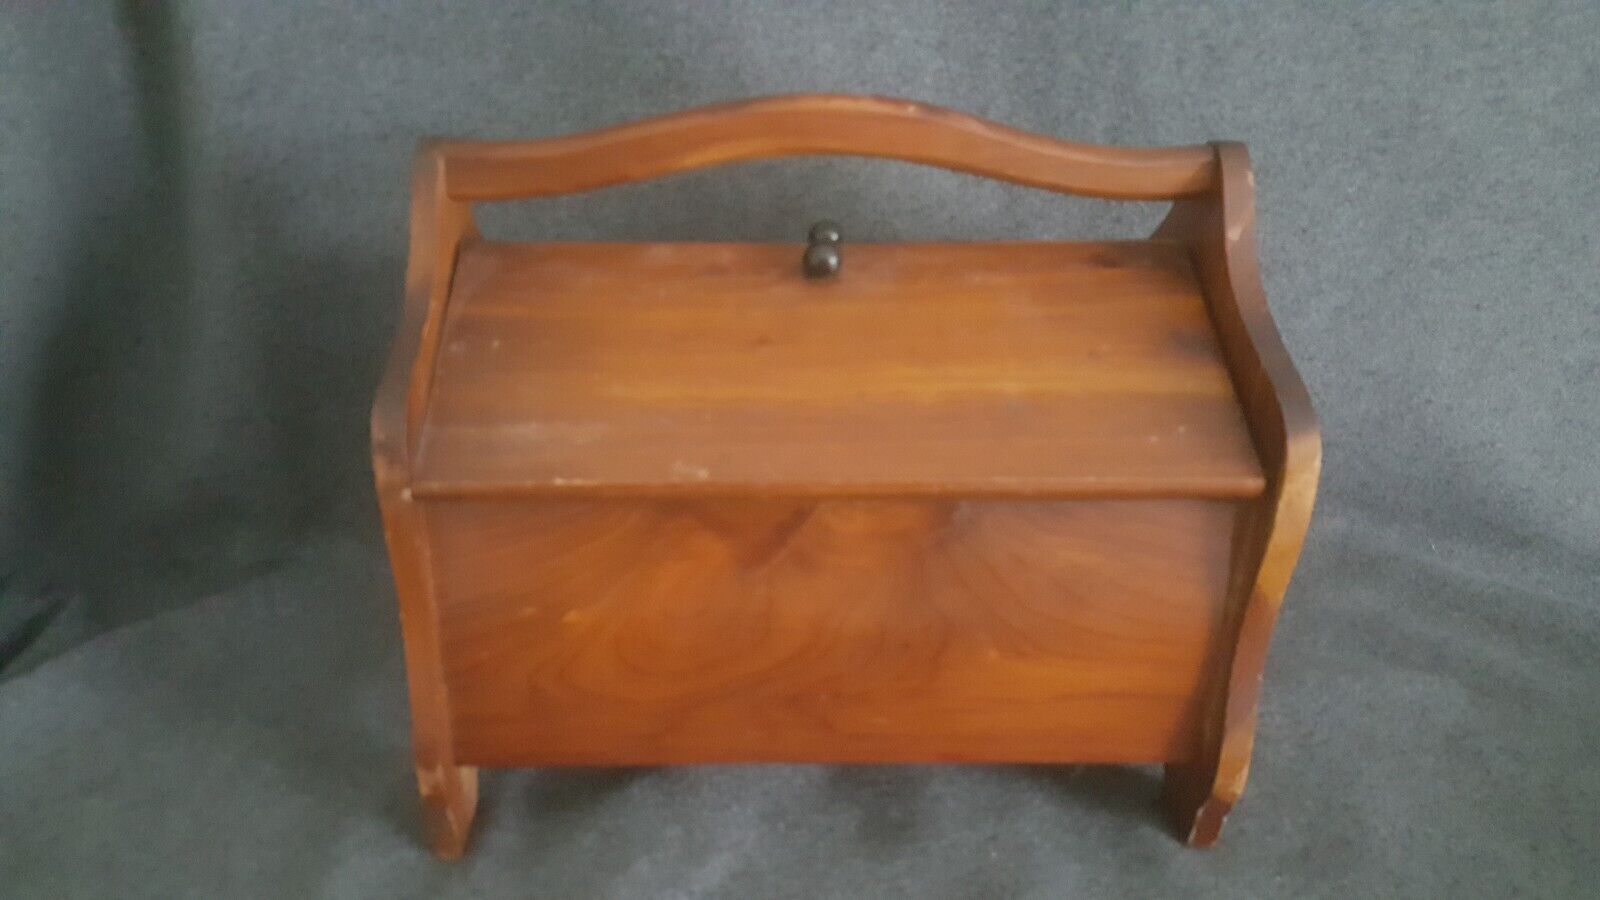 Antique/Vintage Wooden Sewing Box